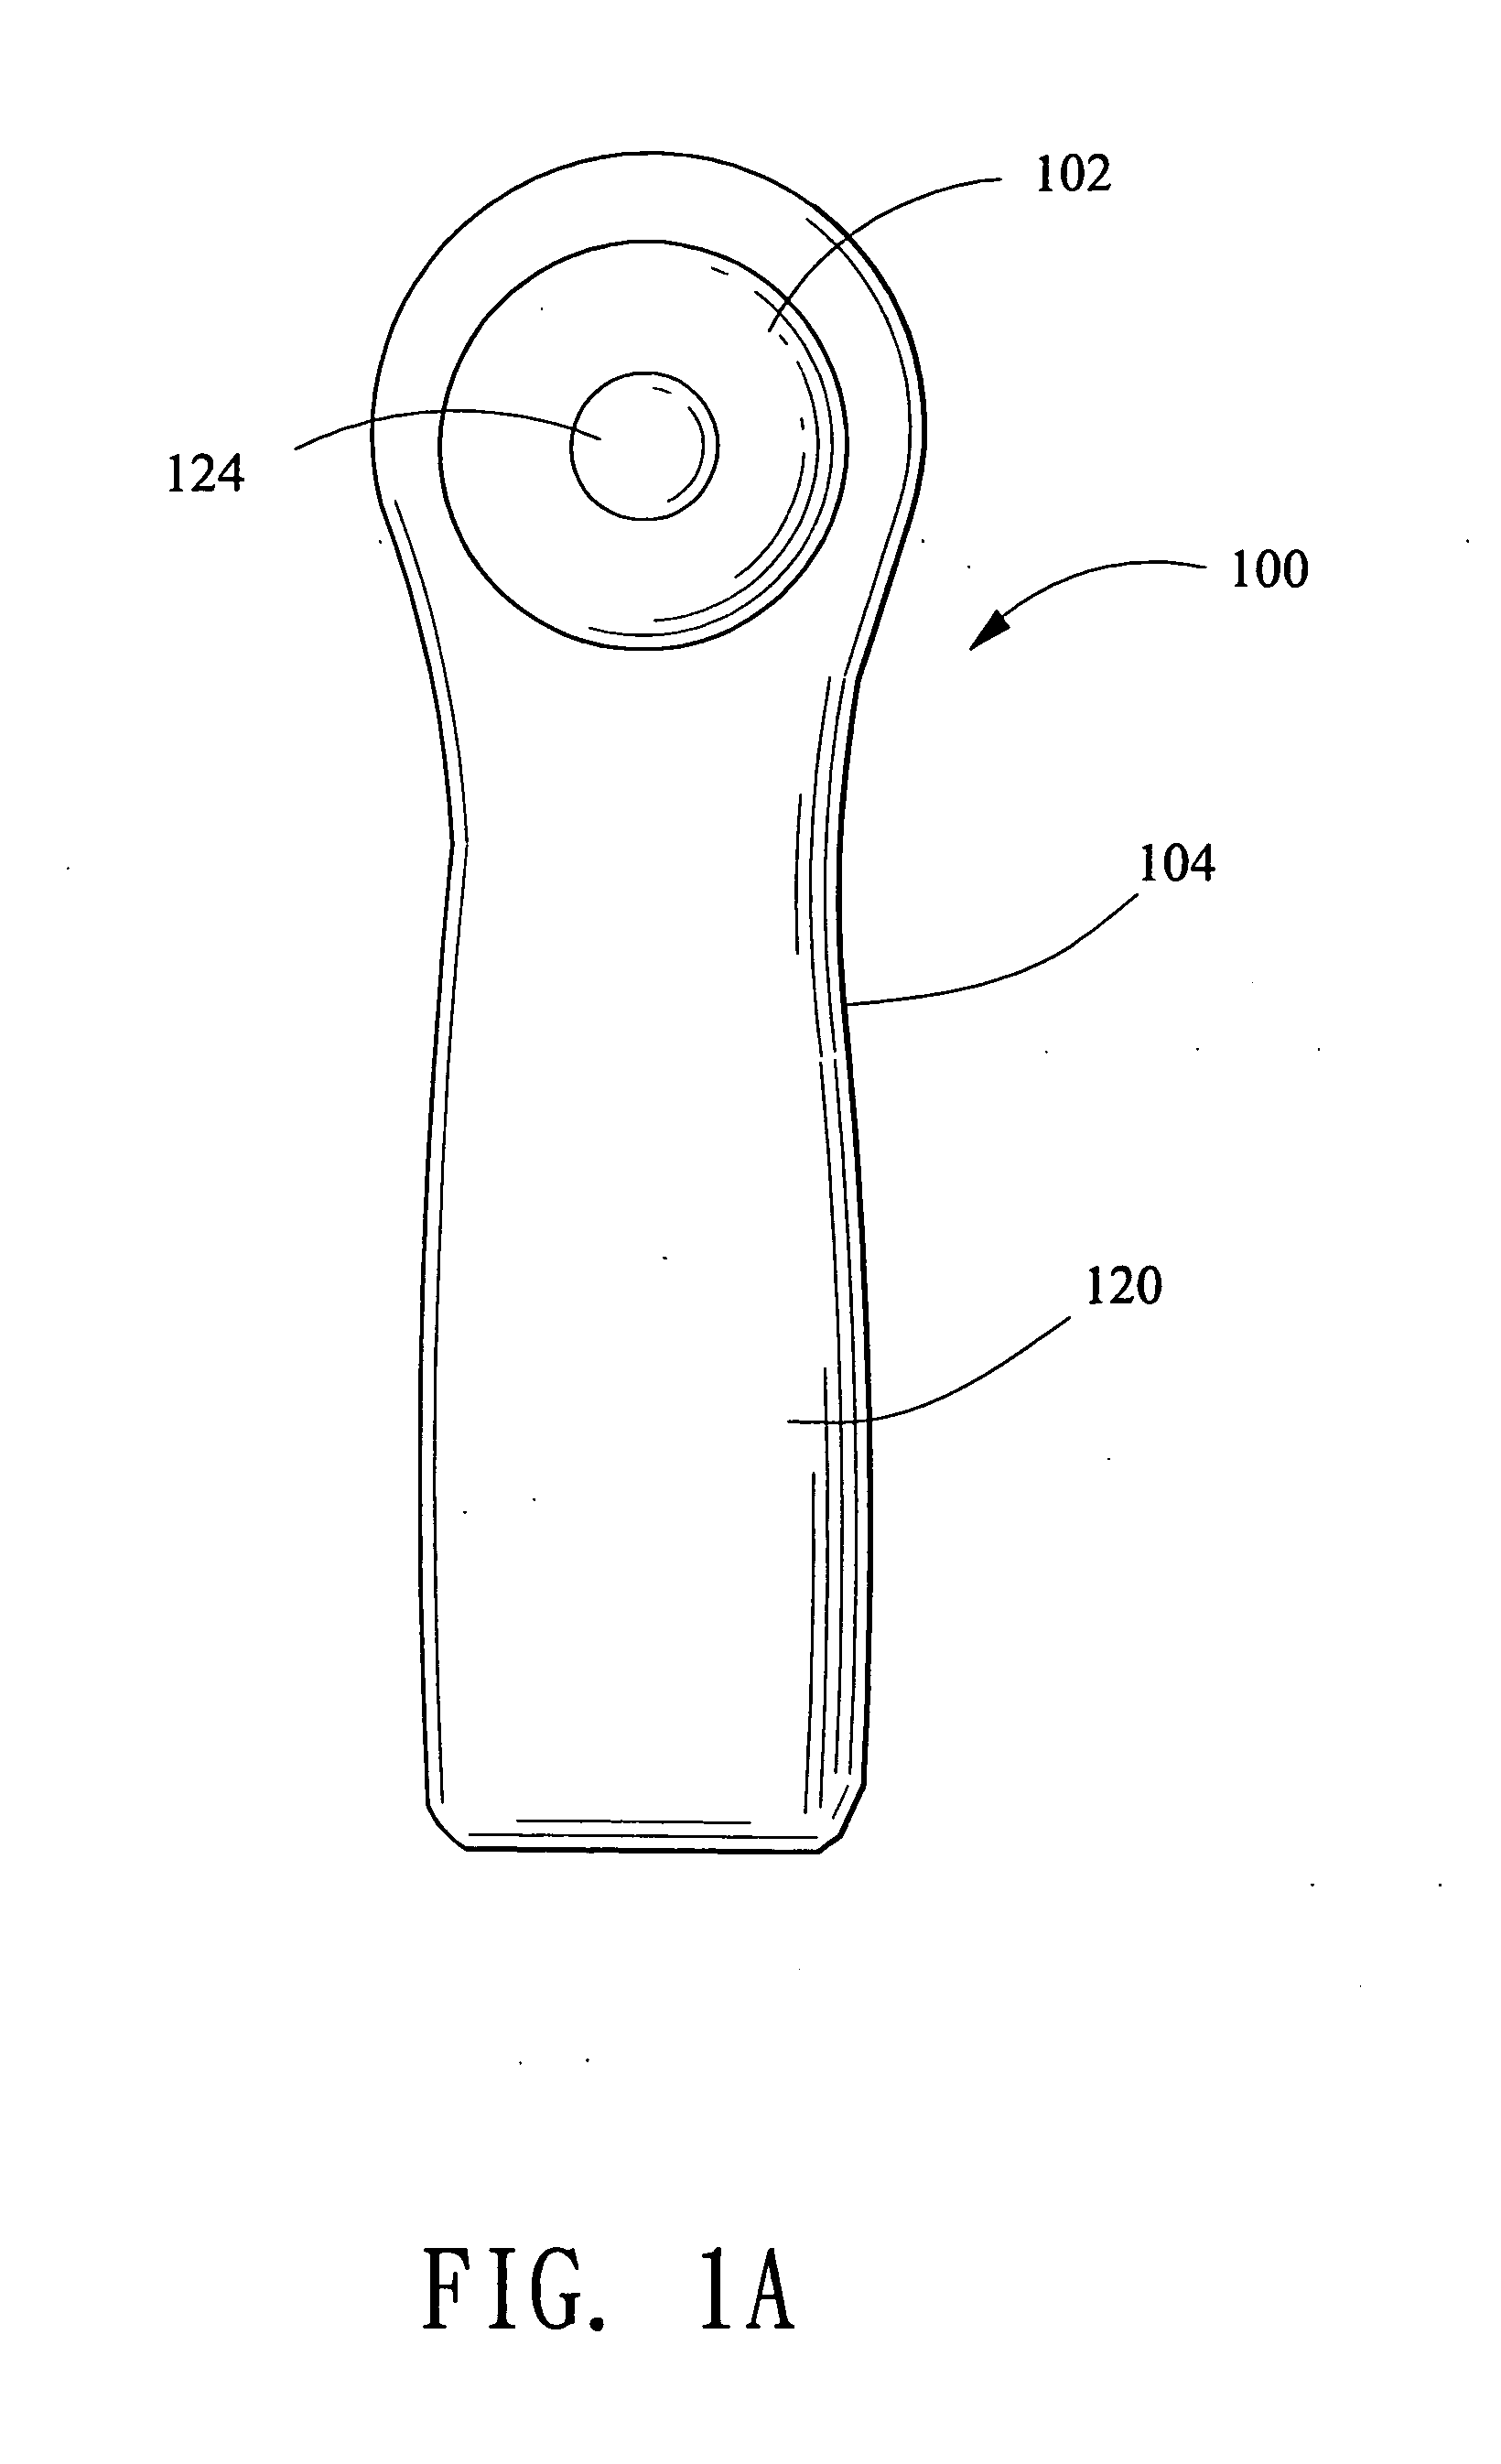 Portable infrared device